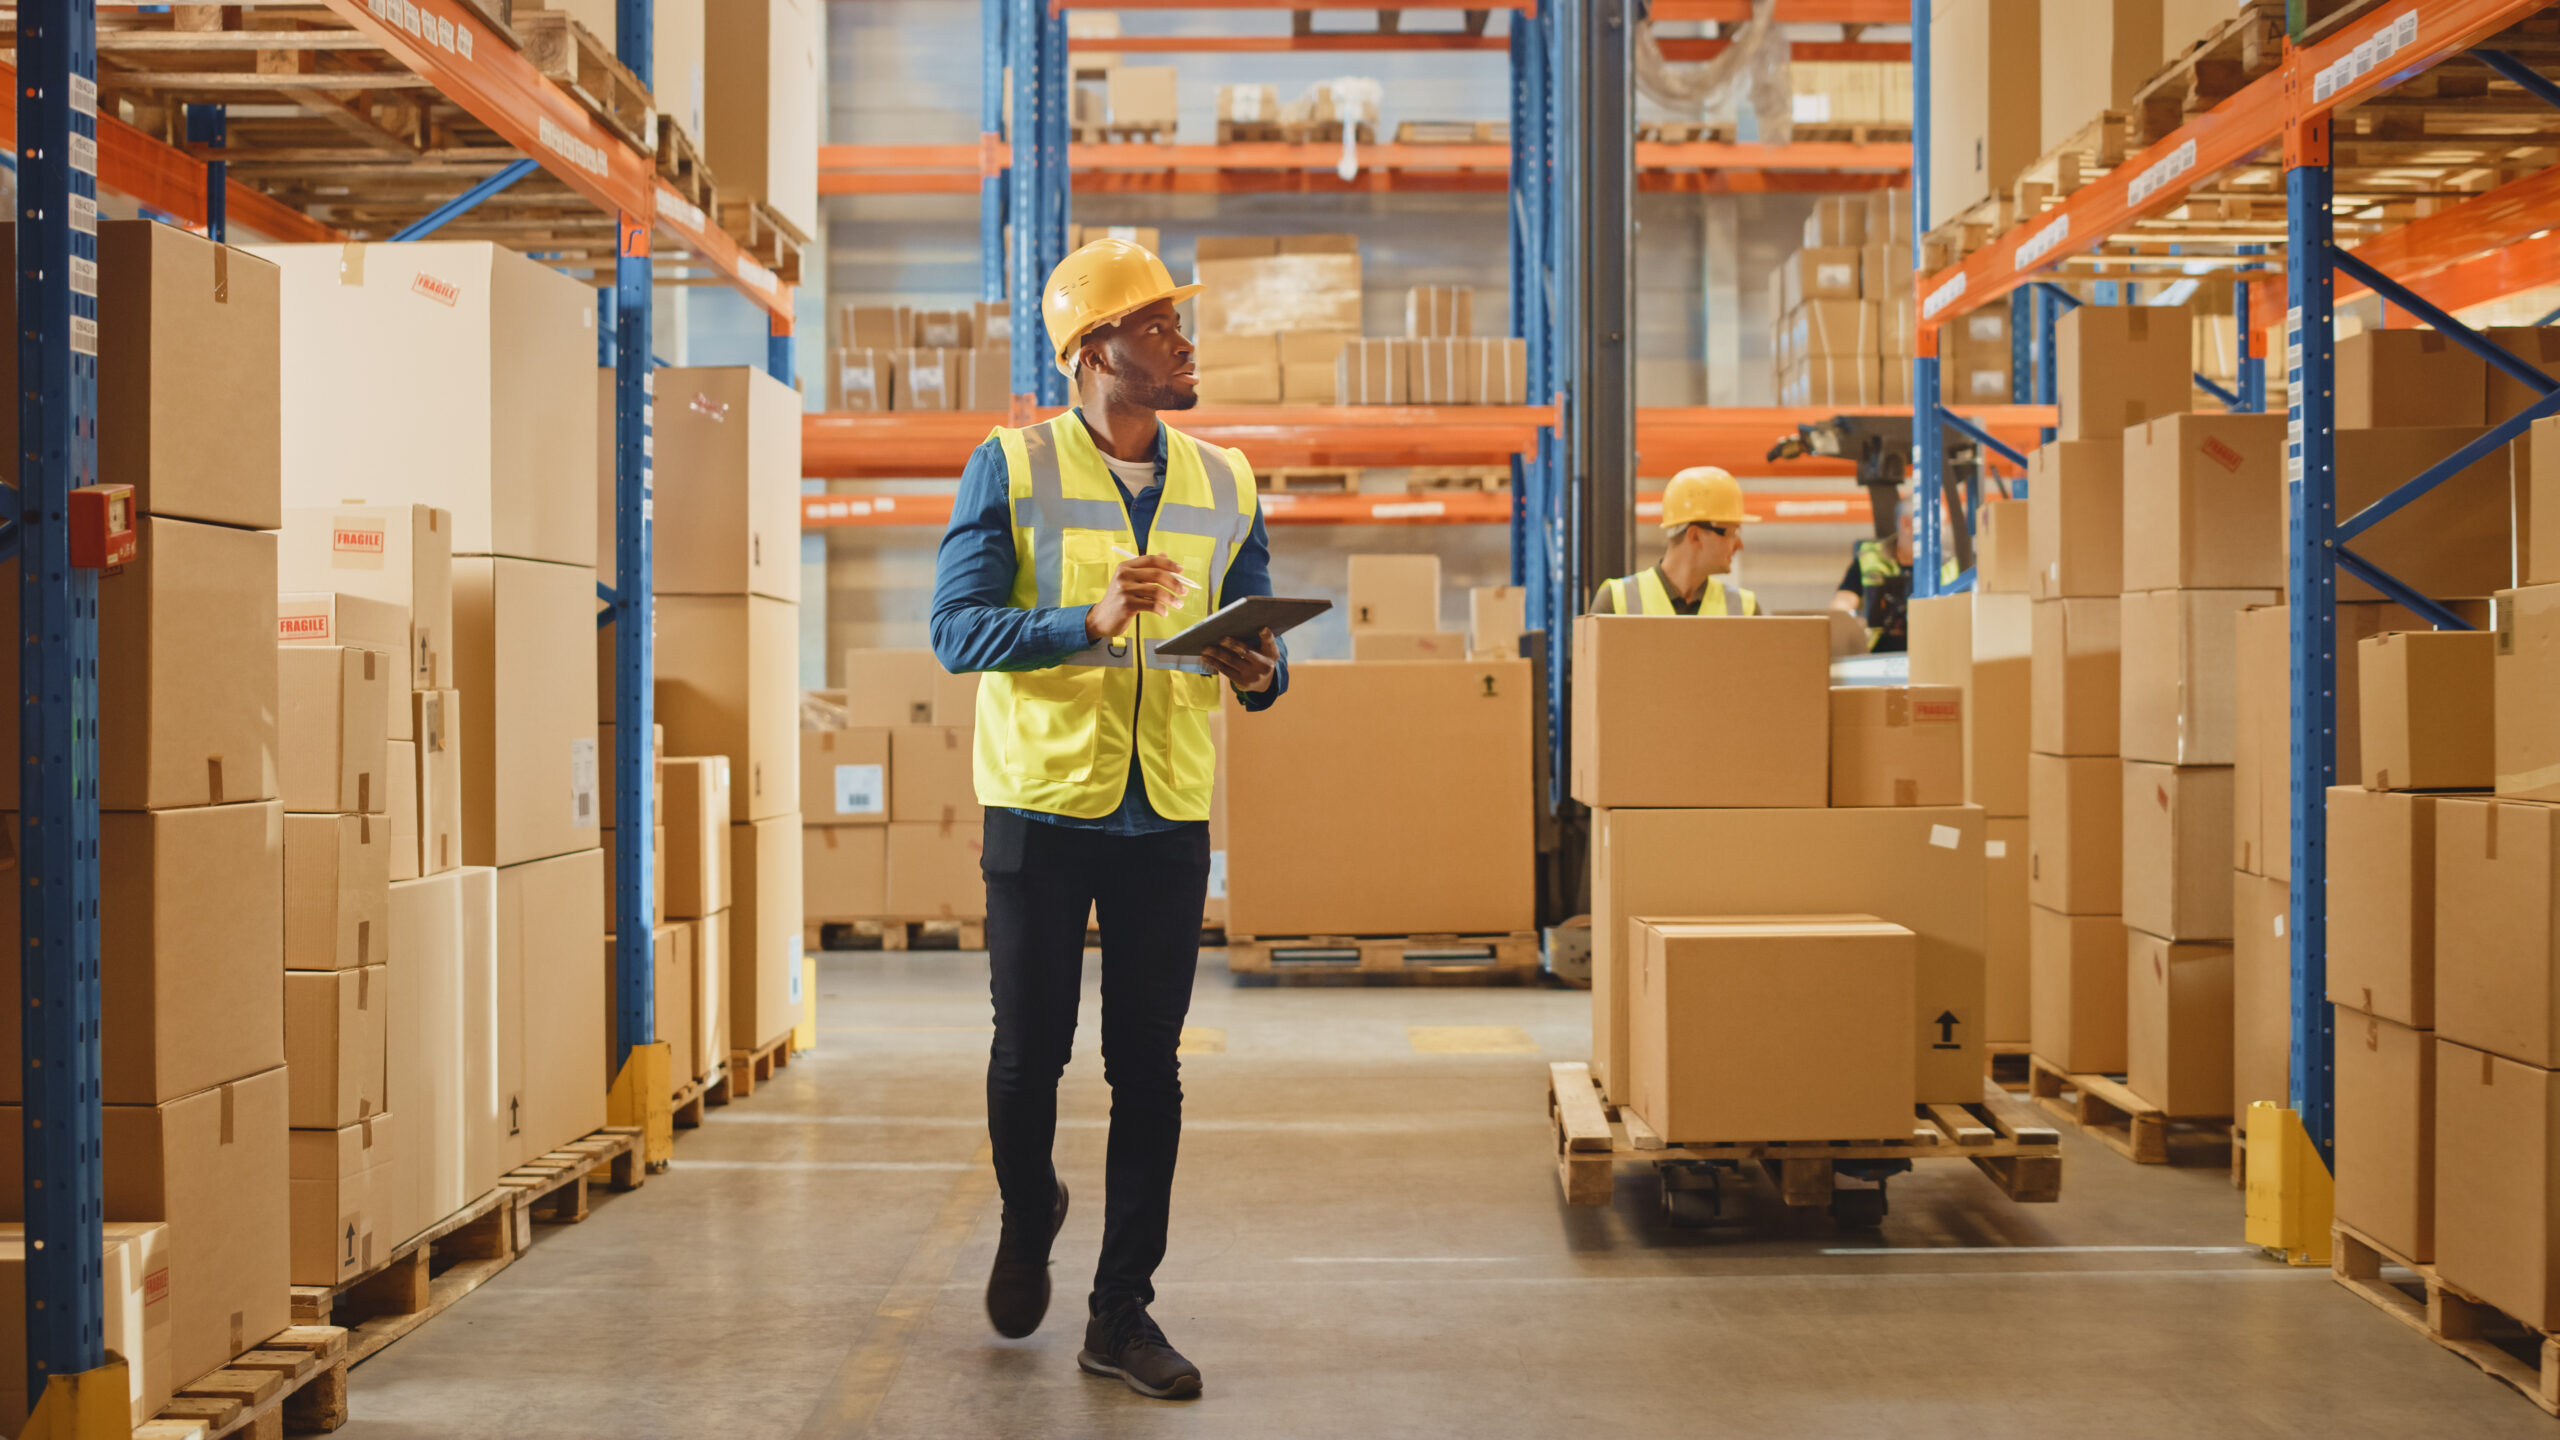 Warehouse inspections